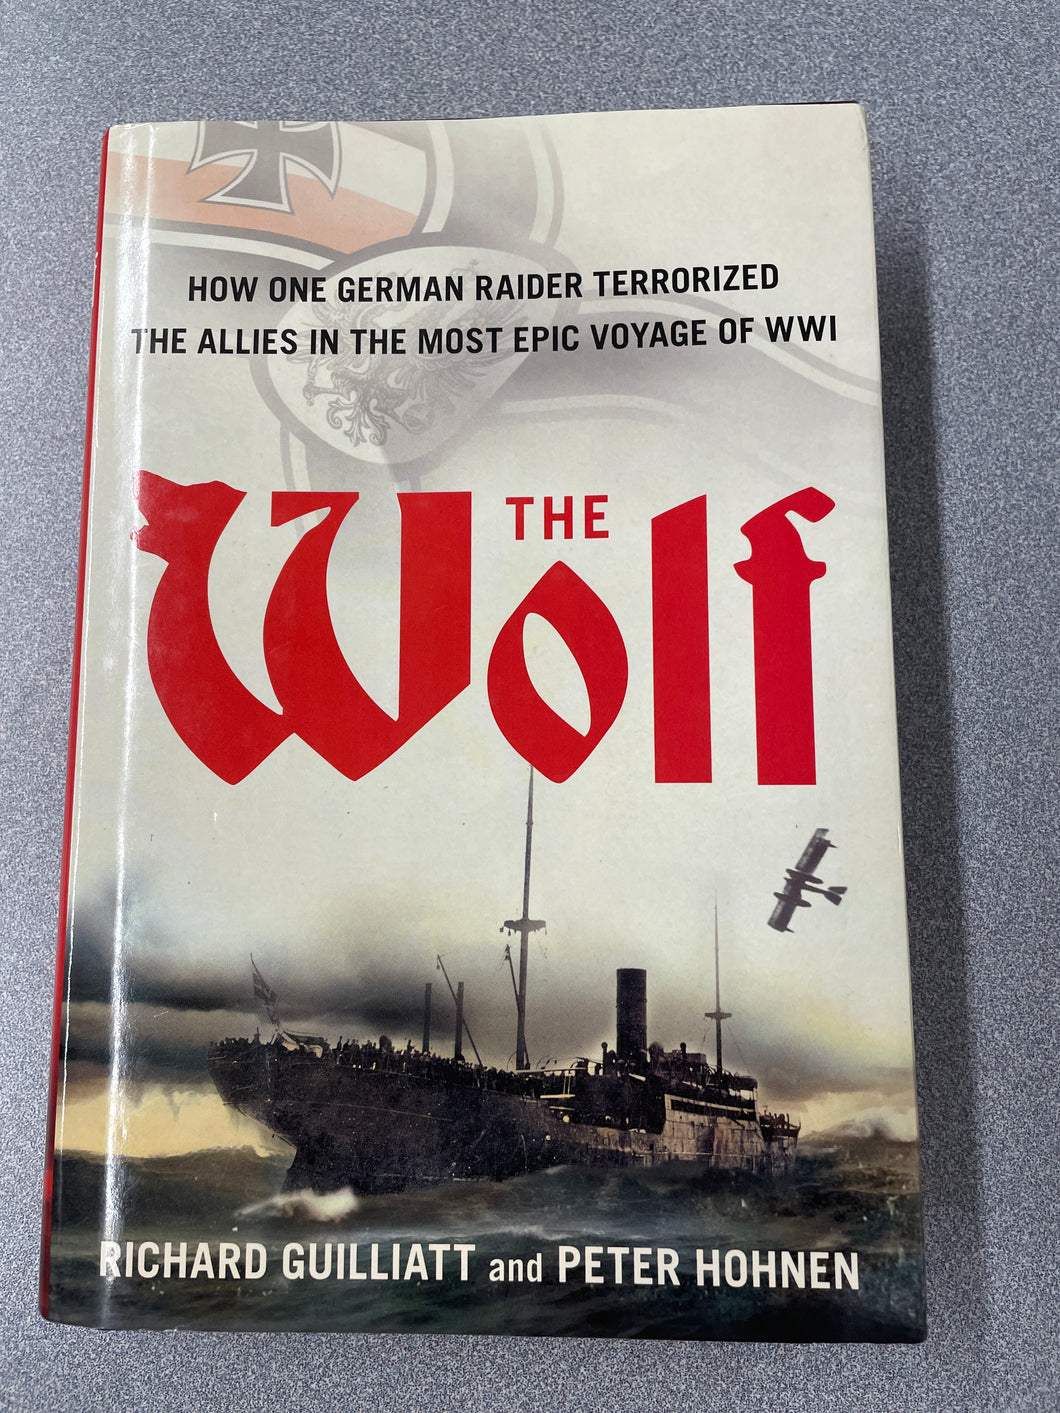 The Wolf: How One German Raider Terrorized the Allies in the Most Epic Voyage of WWI, Guilliatt, Richard [2010] H 12/23